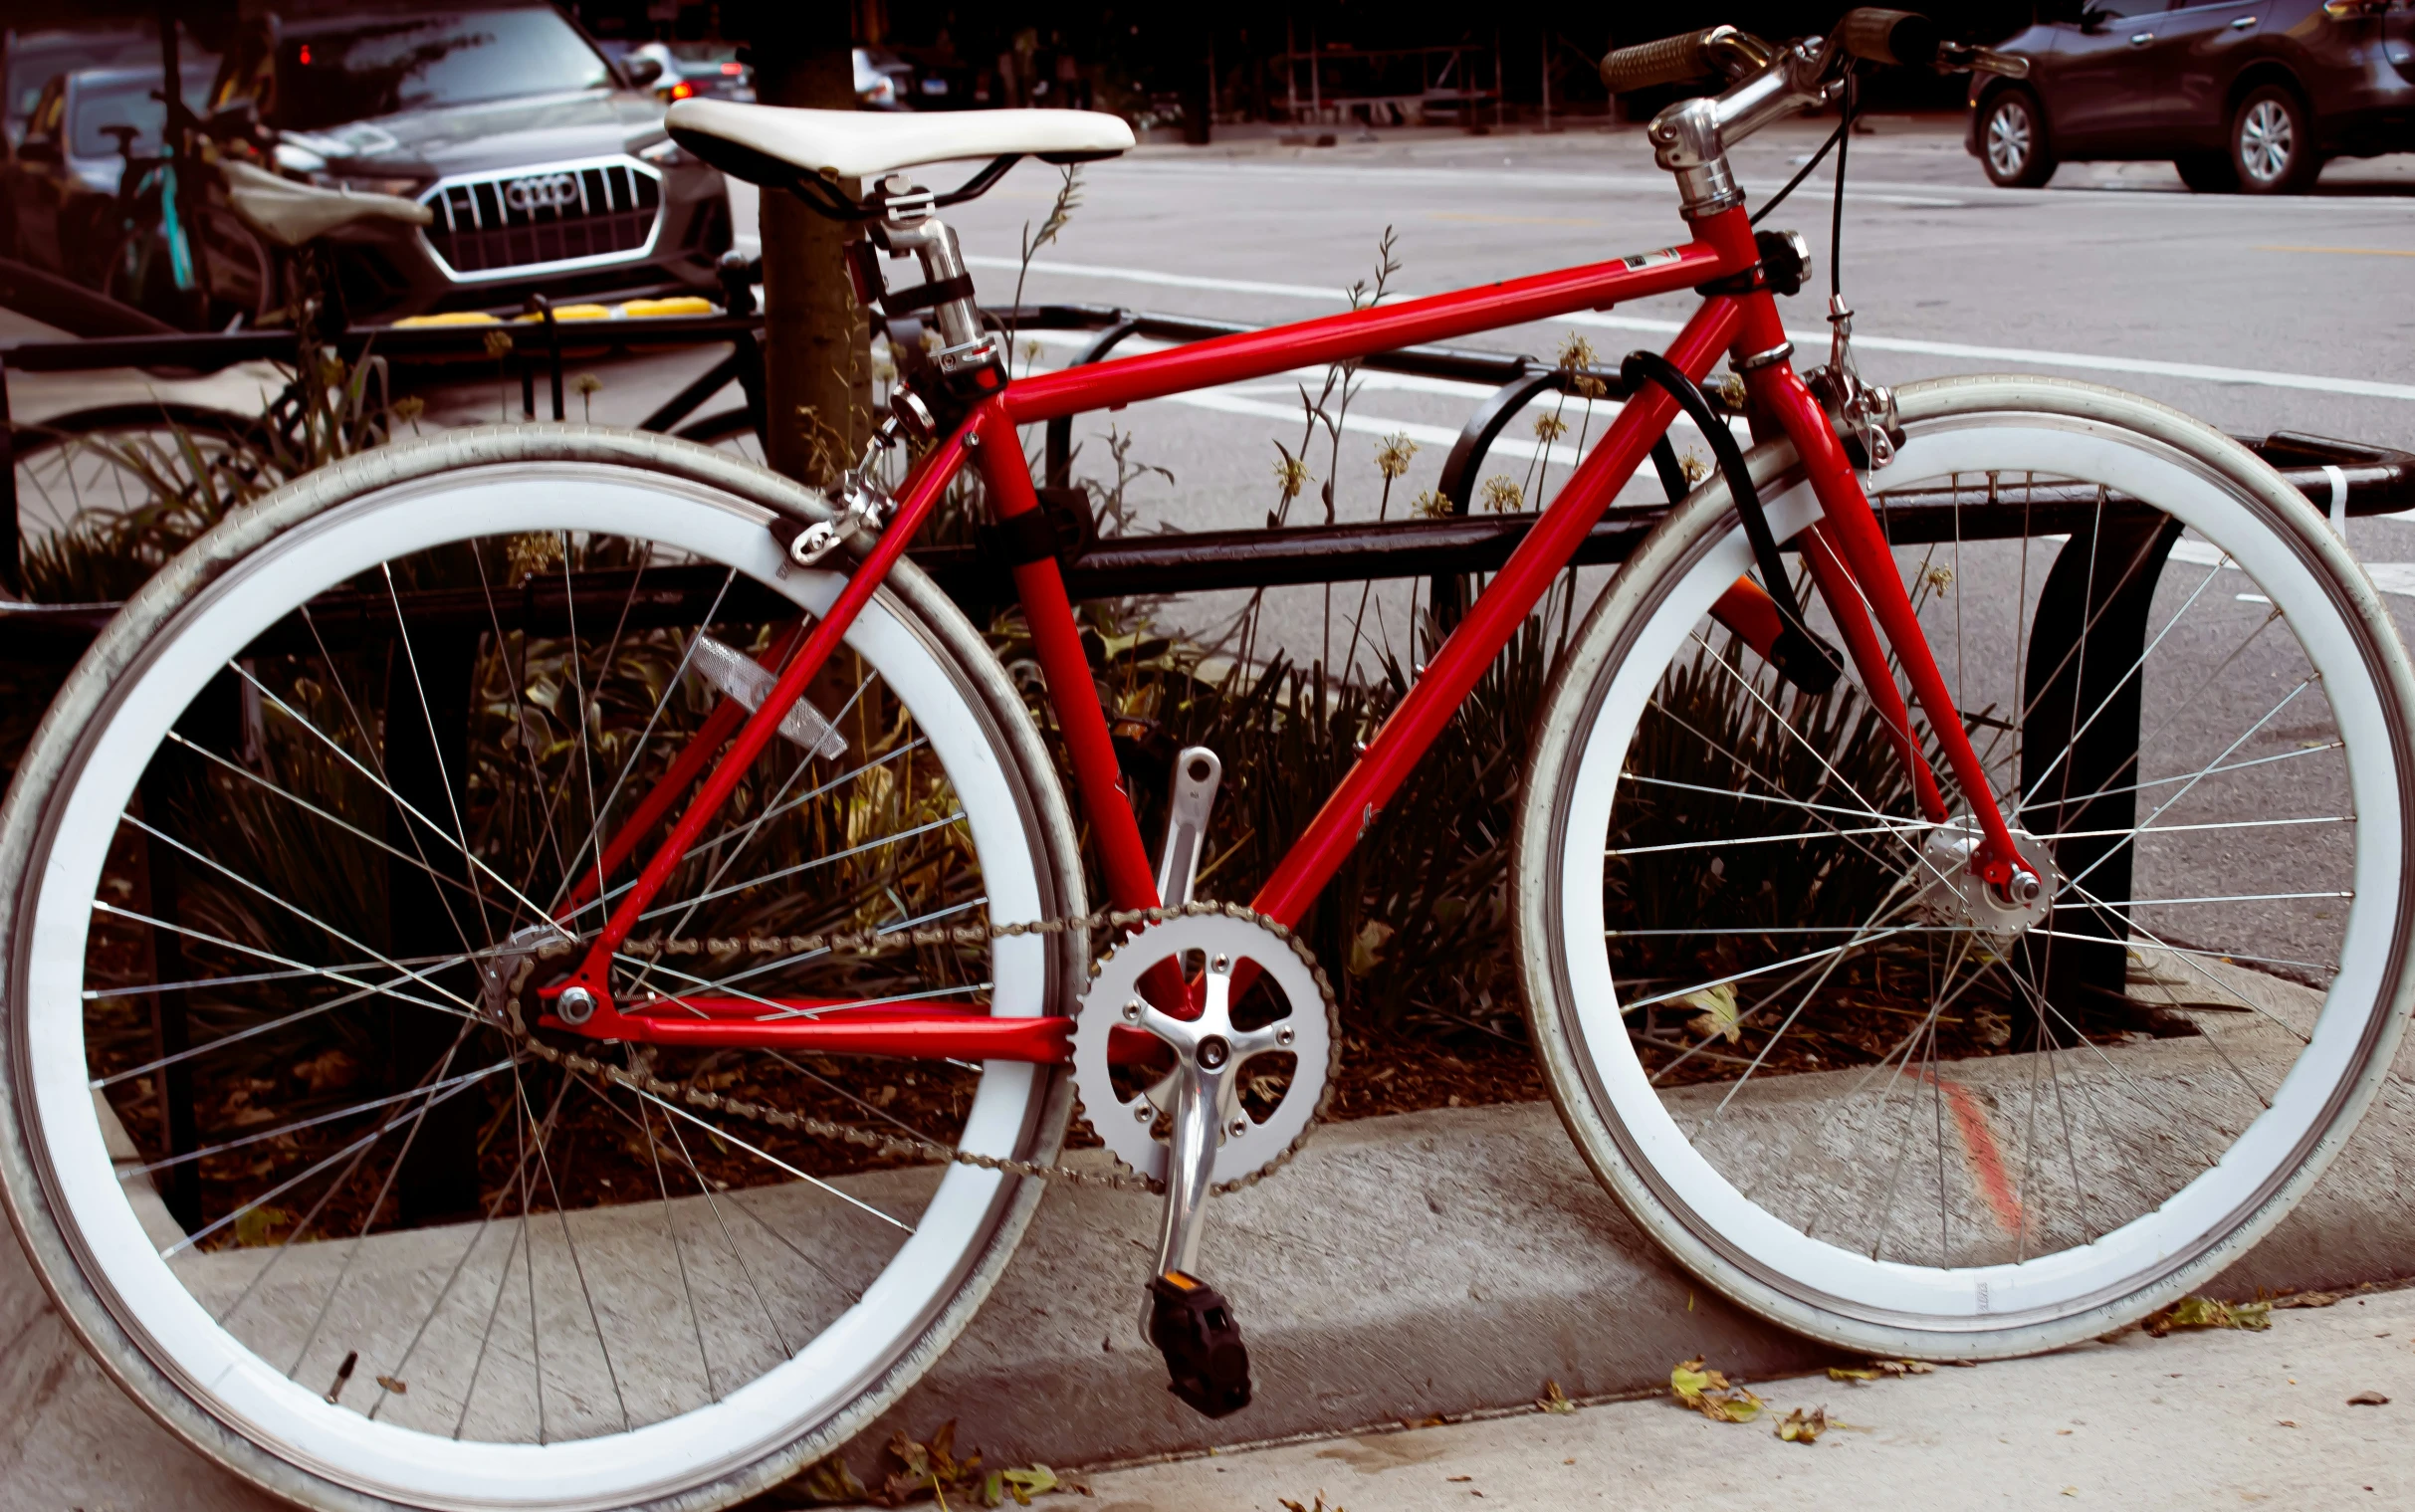 a red bicycle with white rims is parked on the curb